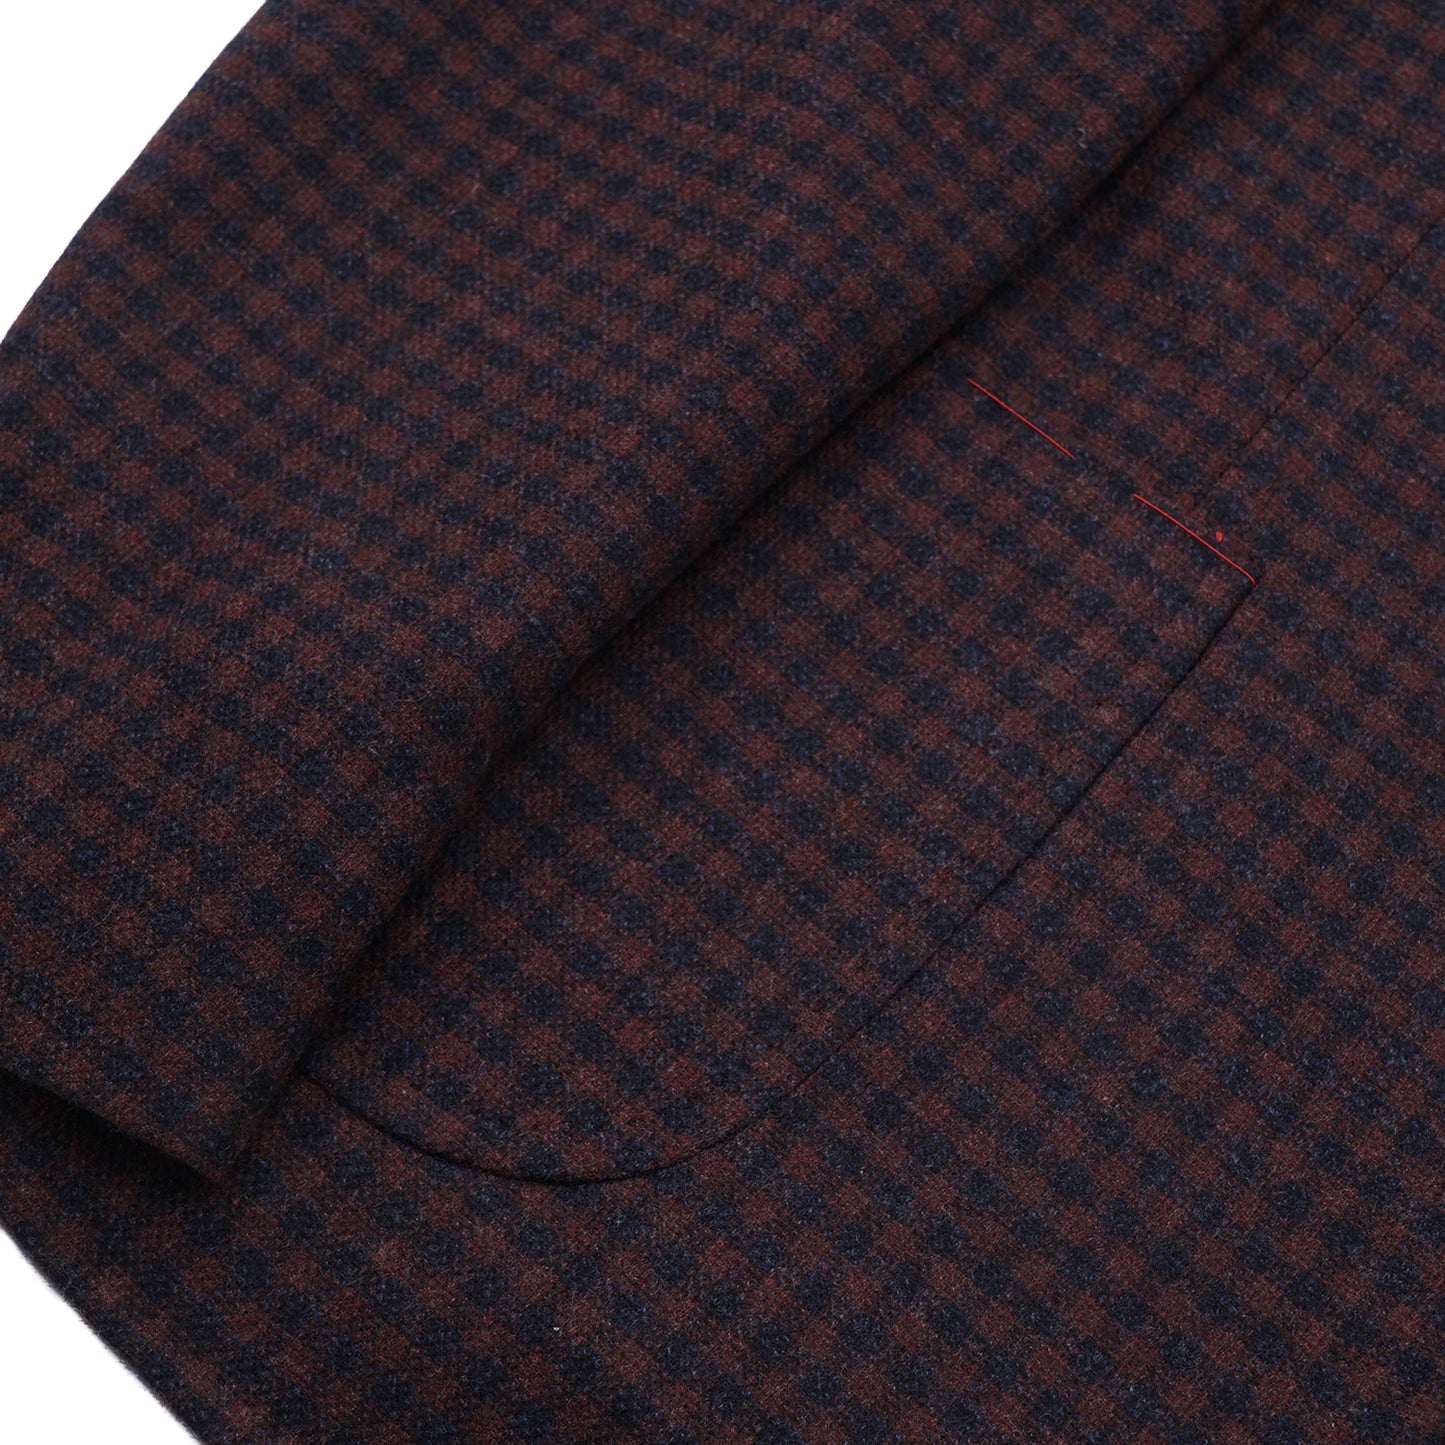 Isaia Slim-Fit Wool and Cashmere Sport Coat - Top Shelf Apparel